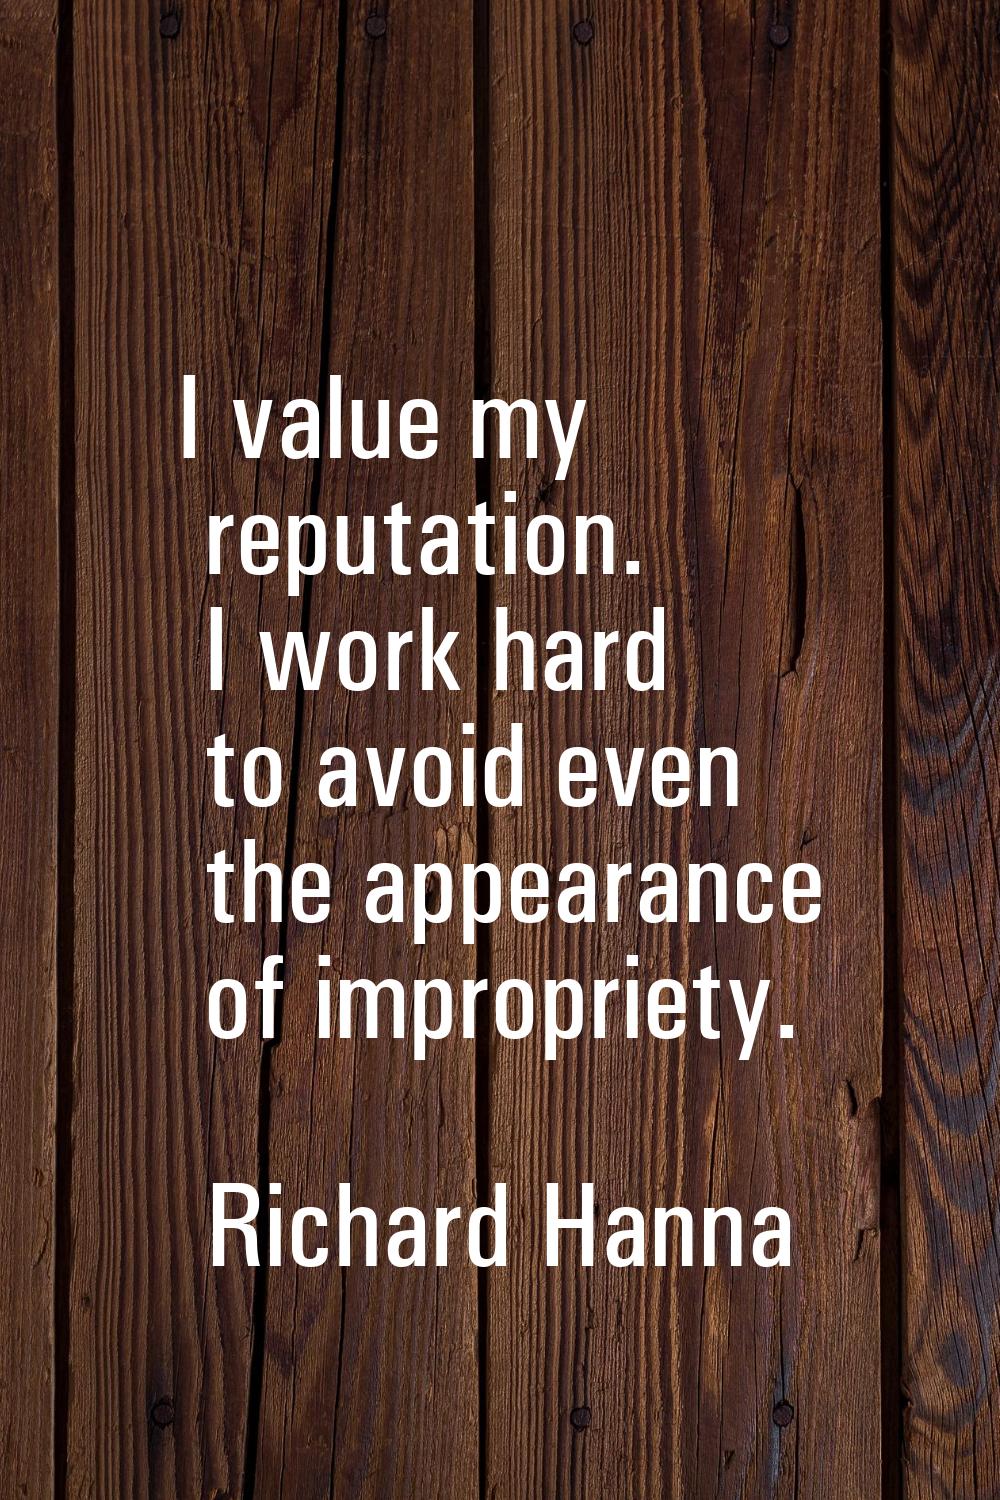 I value my reputation. I work hard to avoid even the appearance of impropriety.